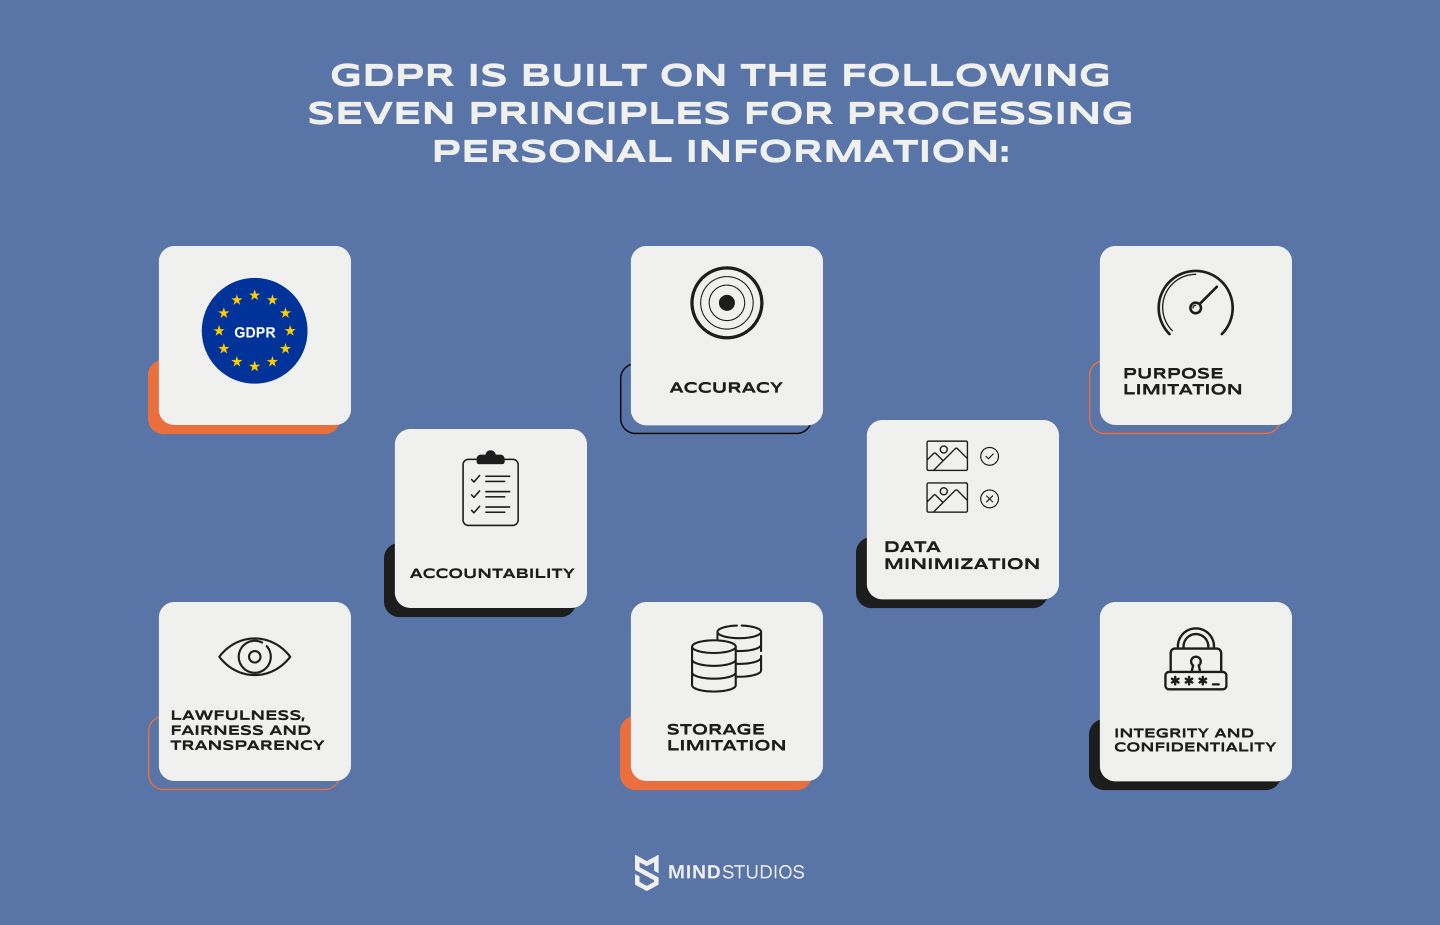 GDPR is built on the following seven principles for processing personal information